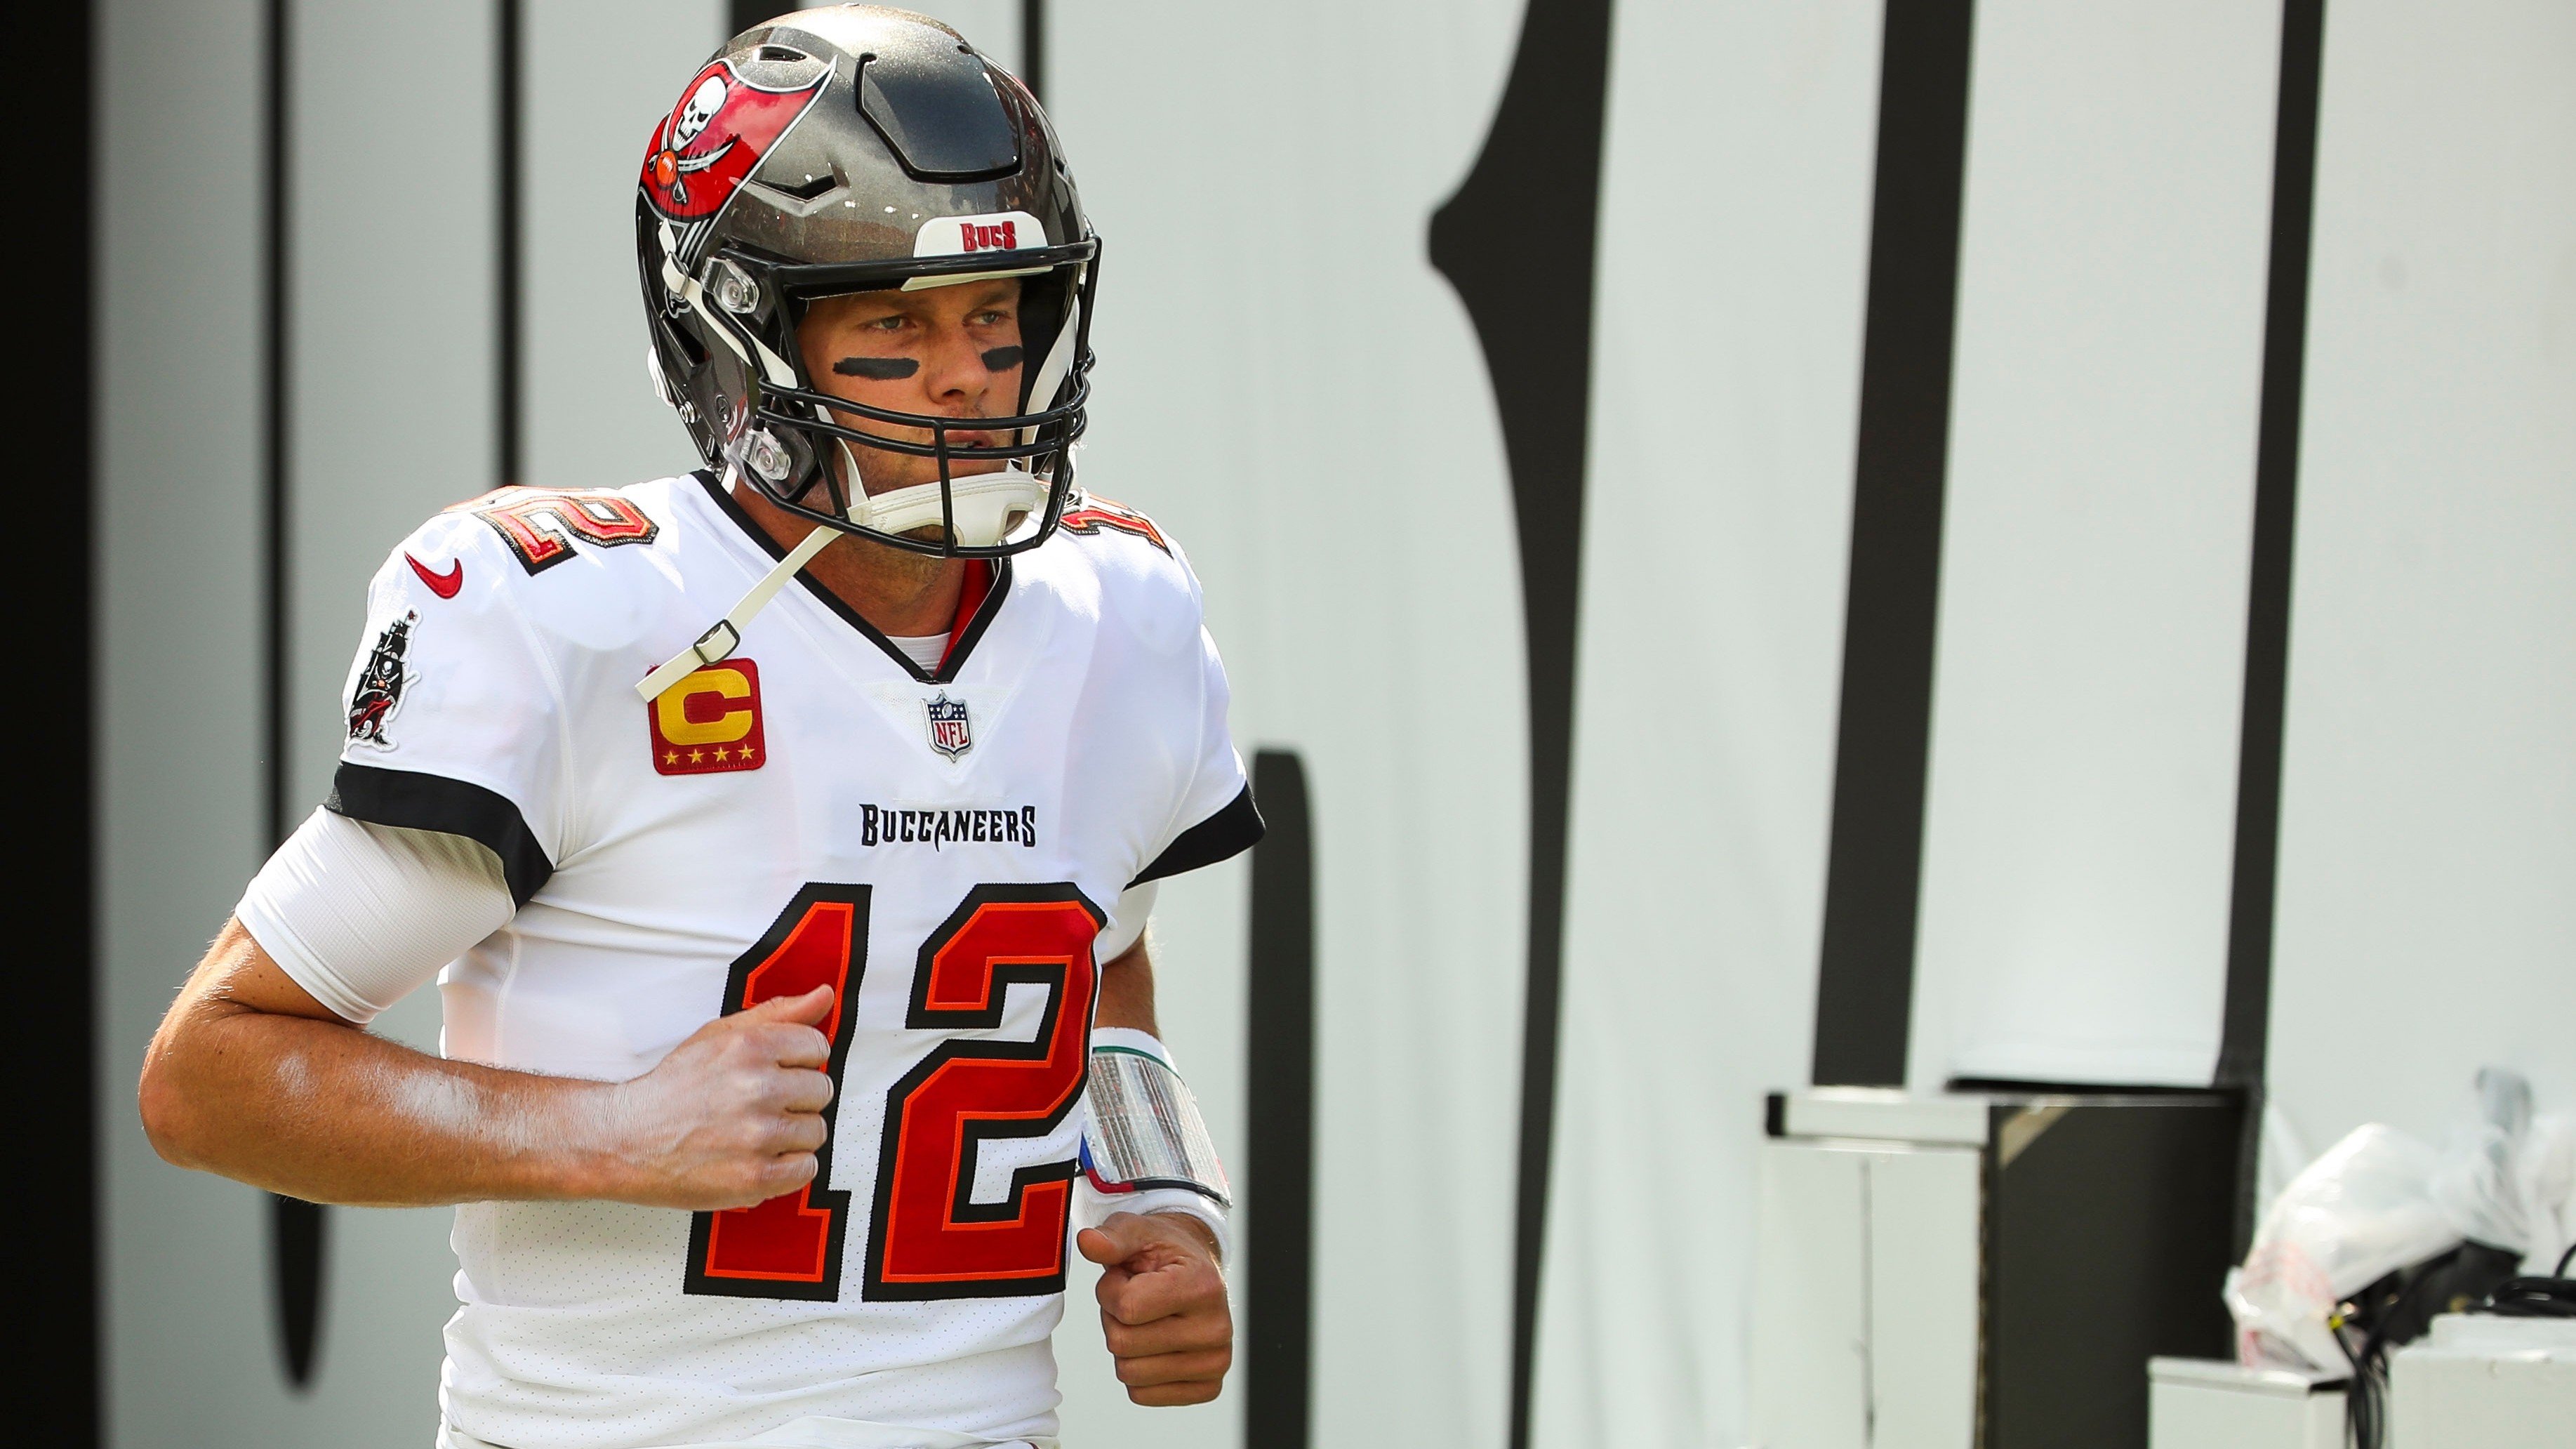 Quarterback Tom Brady is returning to the Tampa Bay Buccaneers less than two months after announcing he was stepping away after 22 seasons in the NFL. Photo: TNS